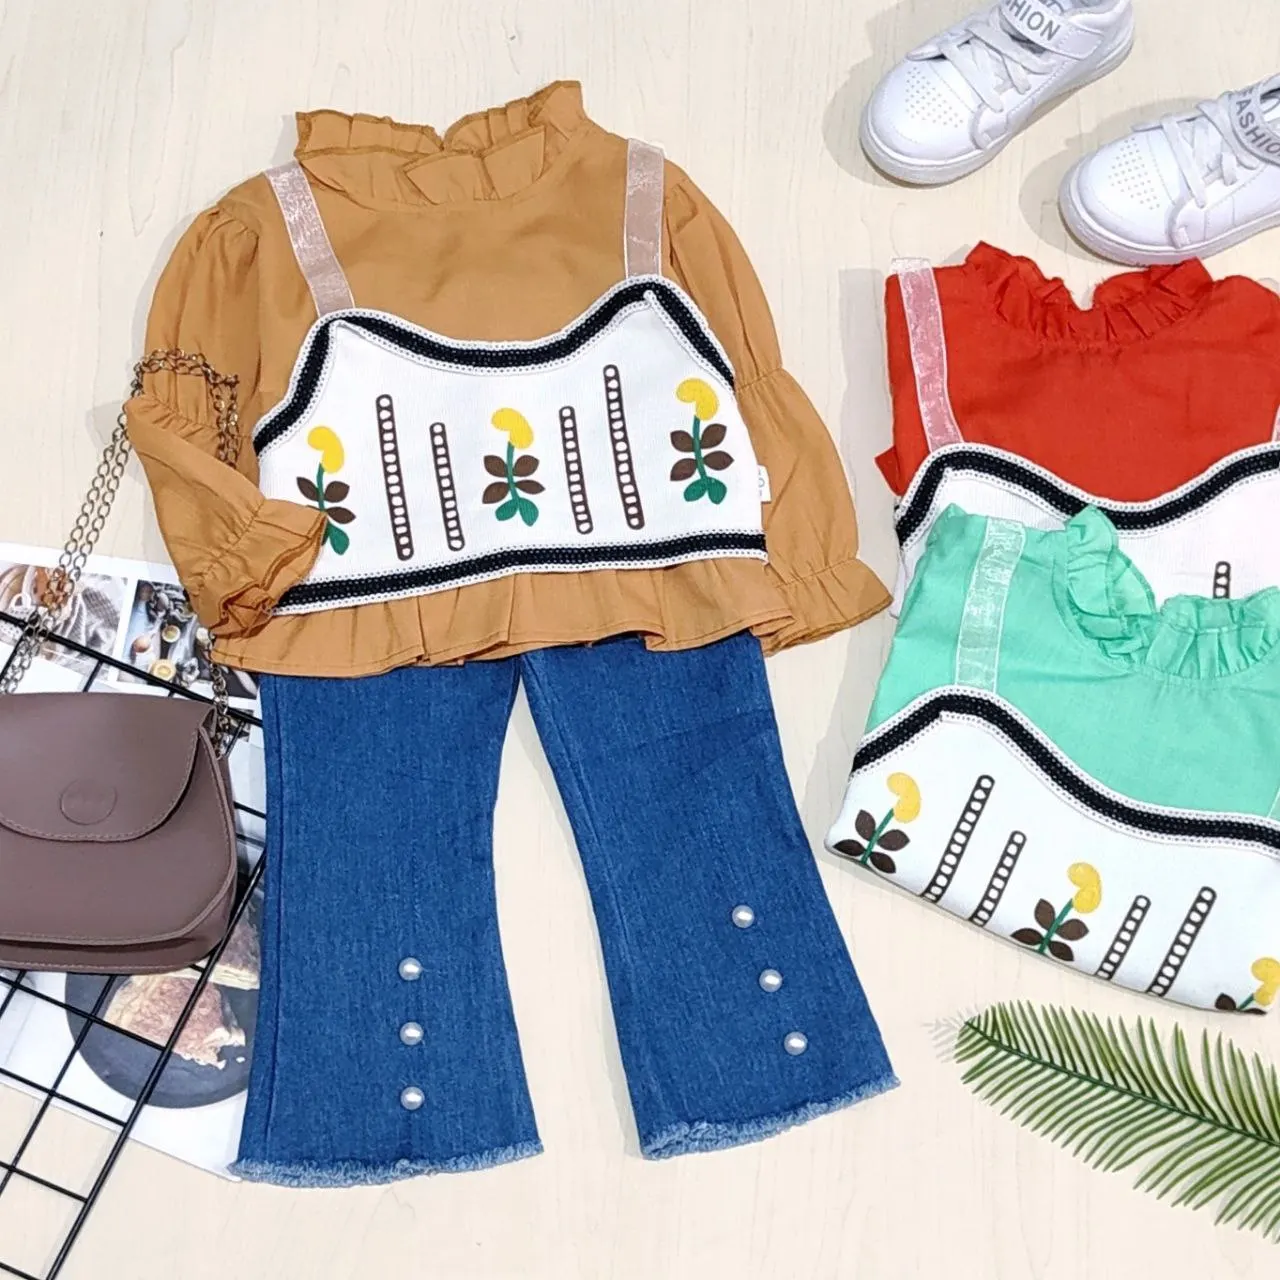 Summer new style girls Korean style clothes set suit inner and jeans kids girls clothes set in stock children clothes